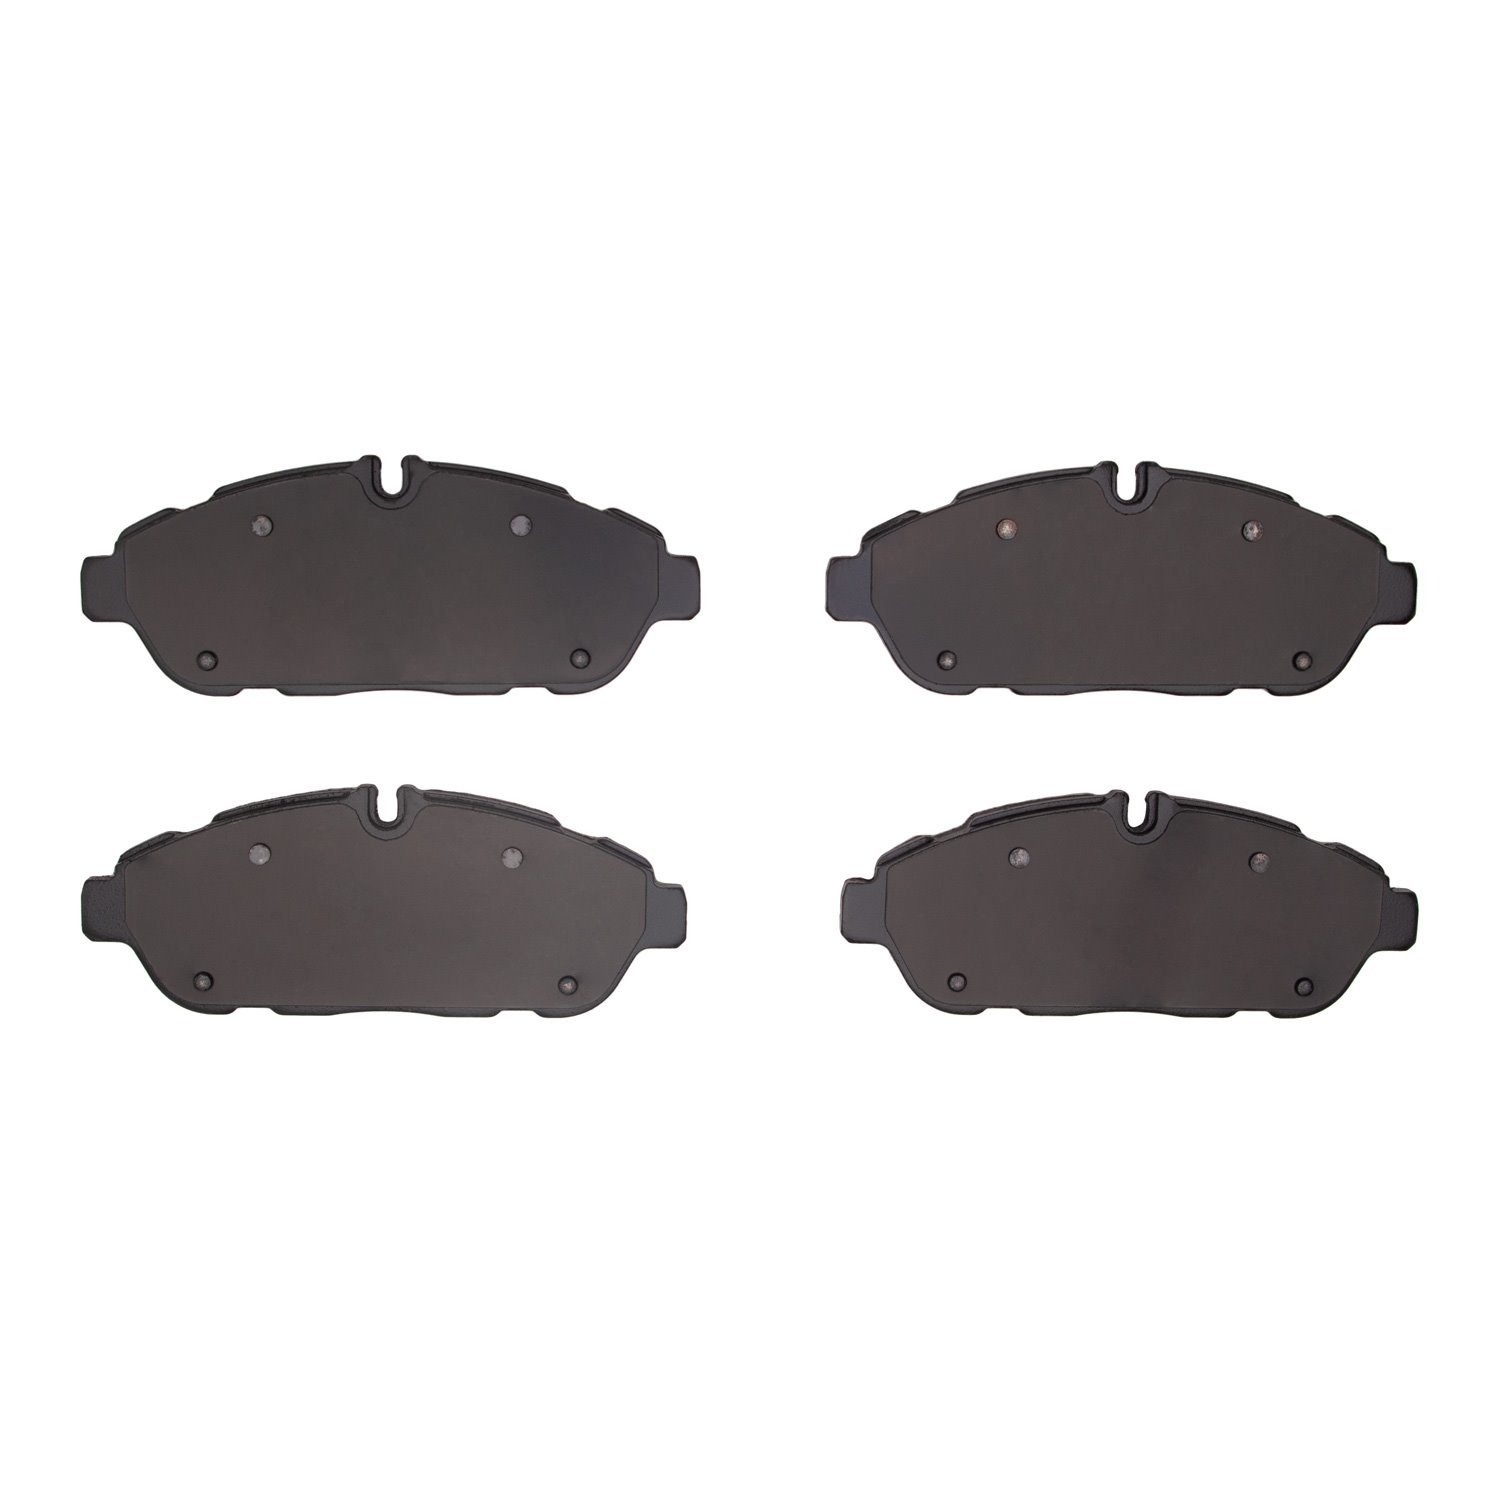 1214-2301-00 Heavy-Duty Semi-Metallic Brake Pads, Fits Select Ford/Lincoln/Mercury/Mazda, Position: Front